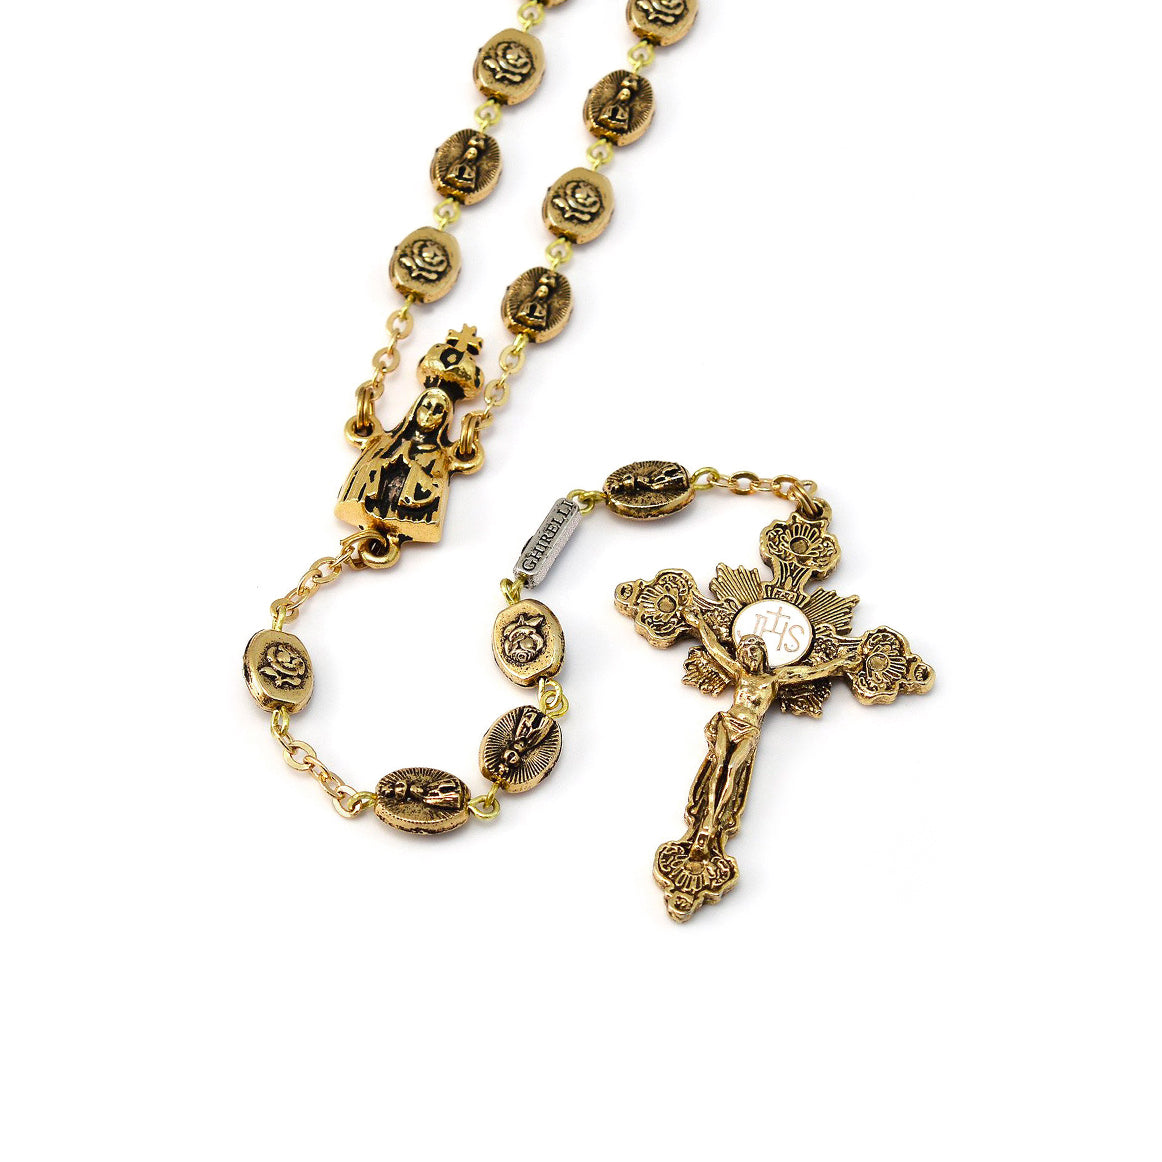 9ct Yellow Gold Rosary Bracelet with Madonna and Cross